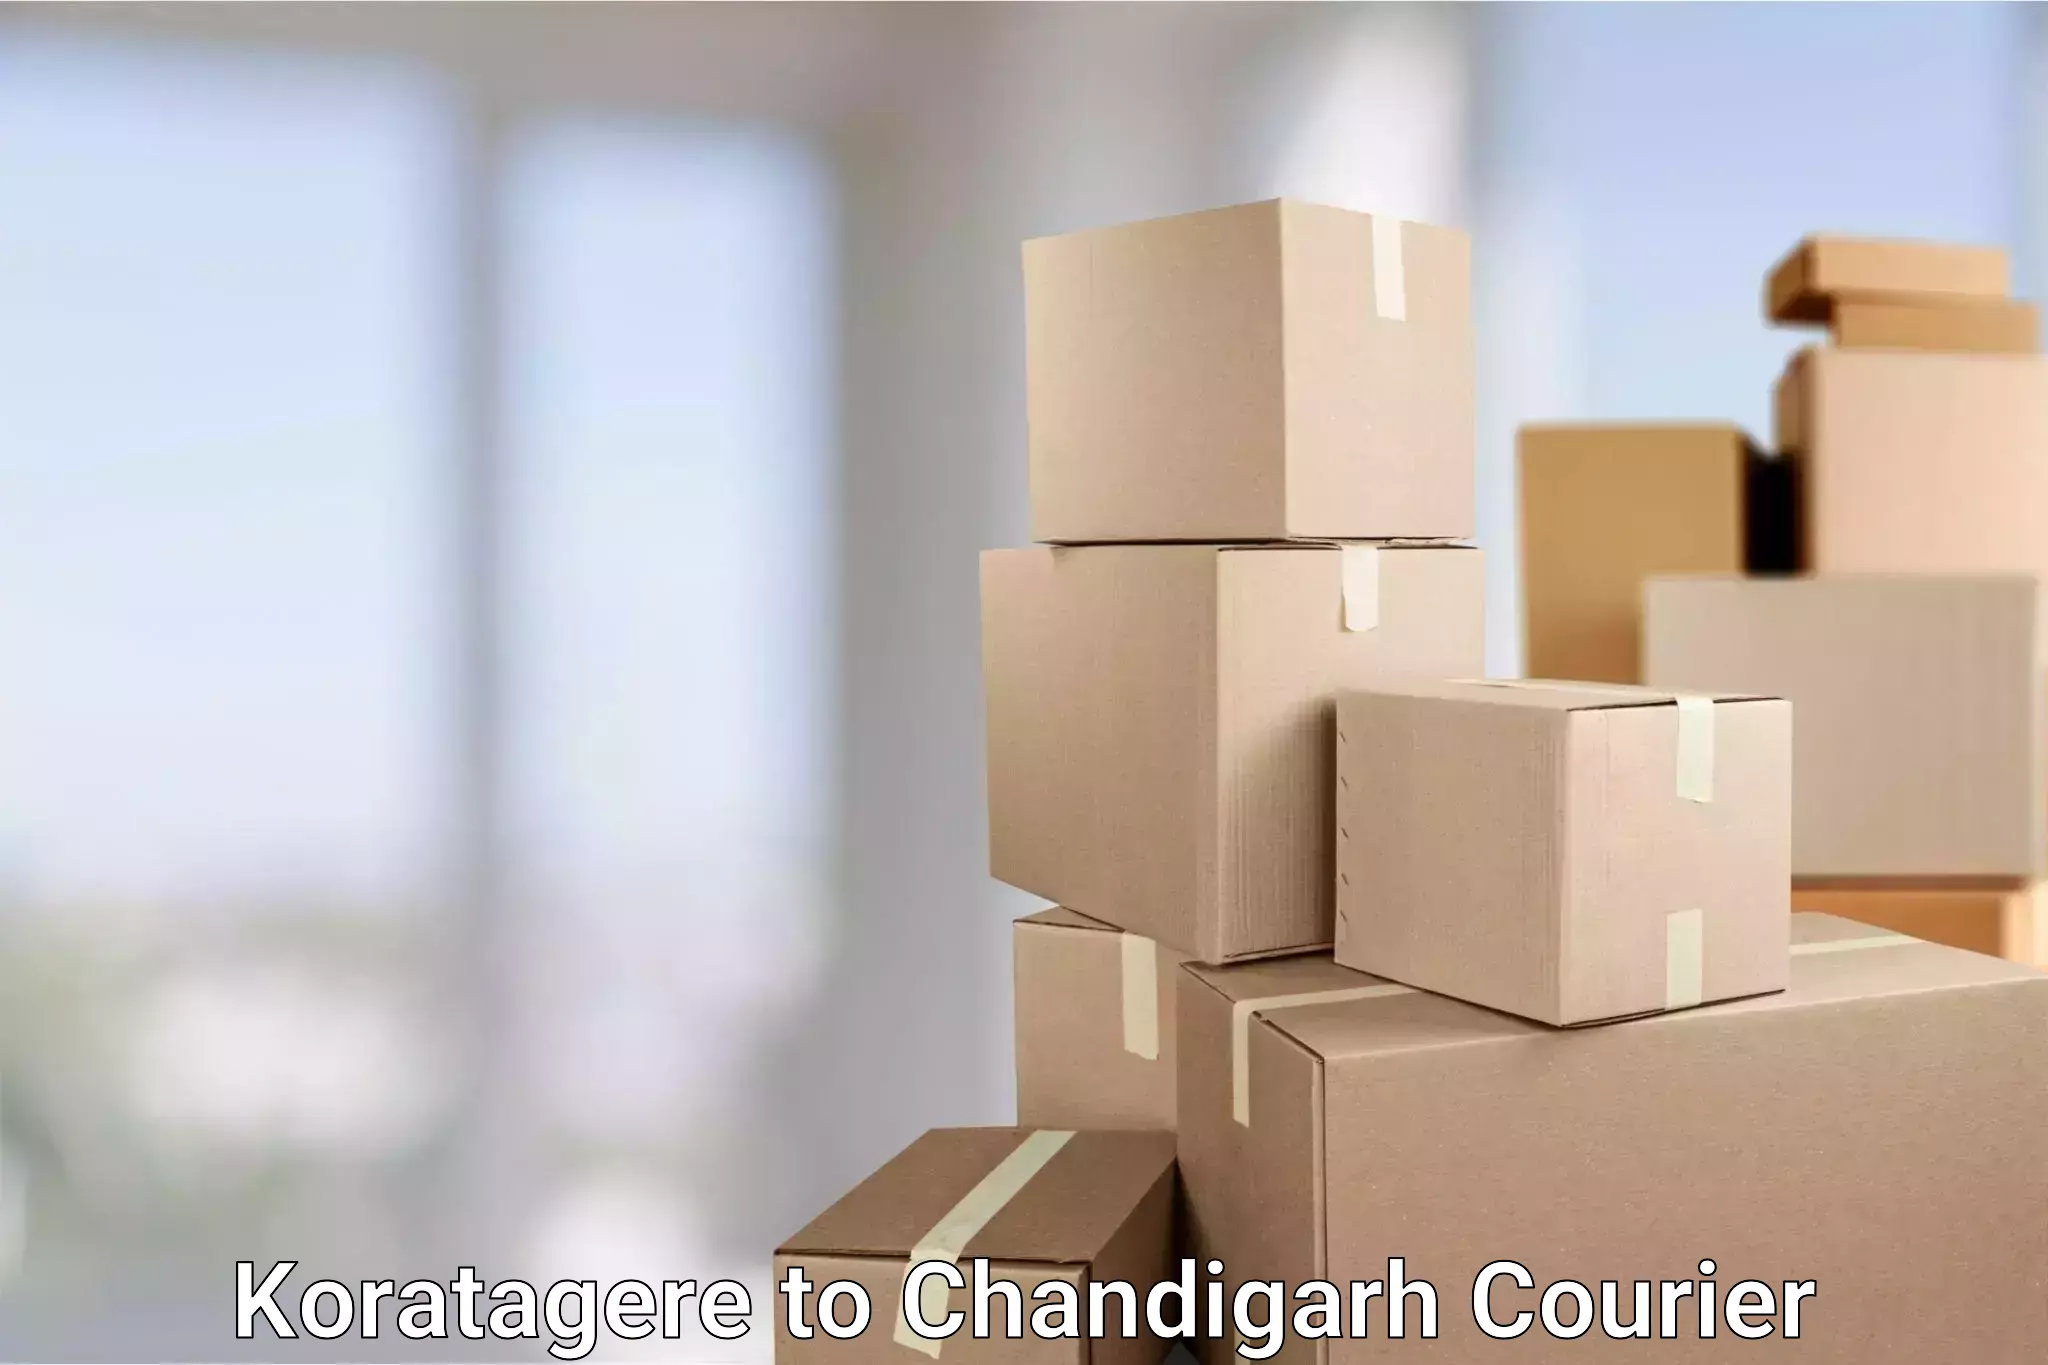 Shipping and handling Koratagere to Chandigarh